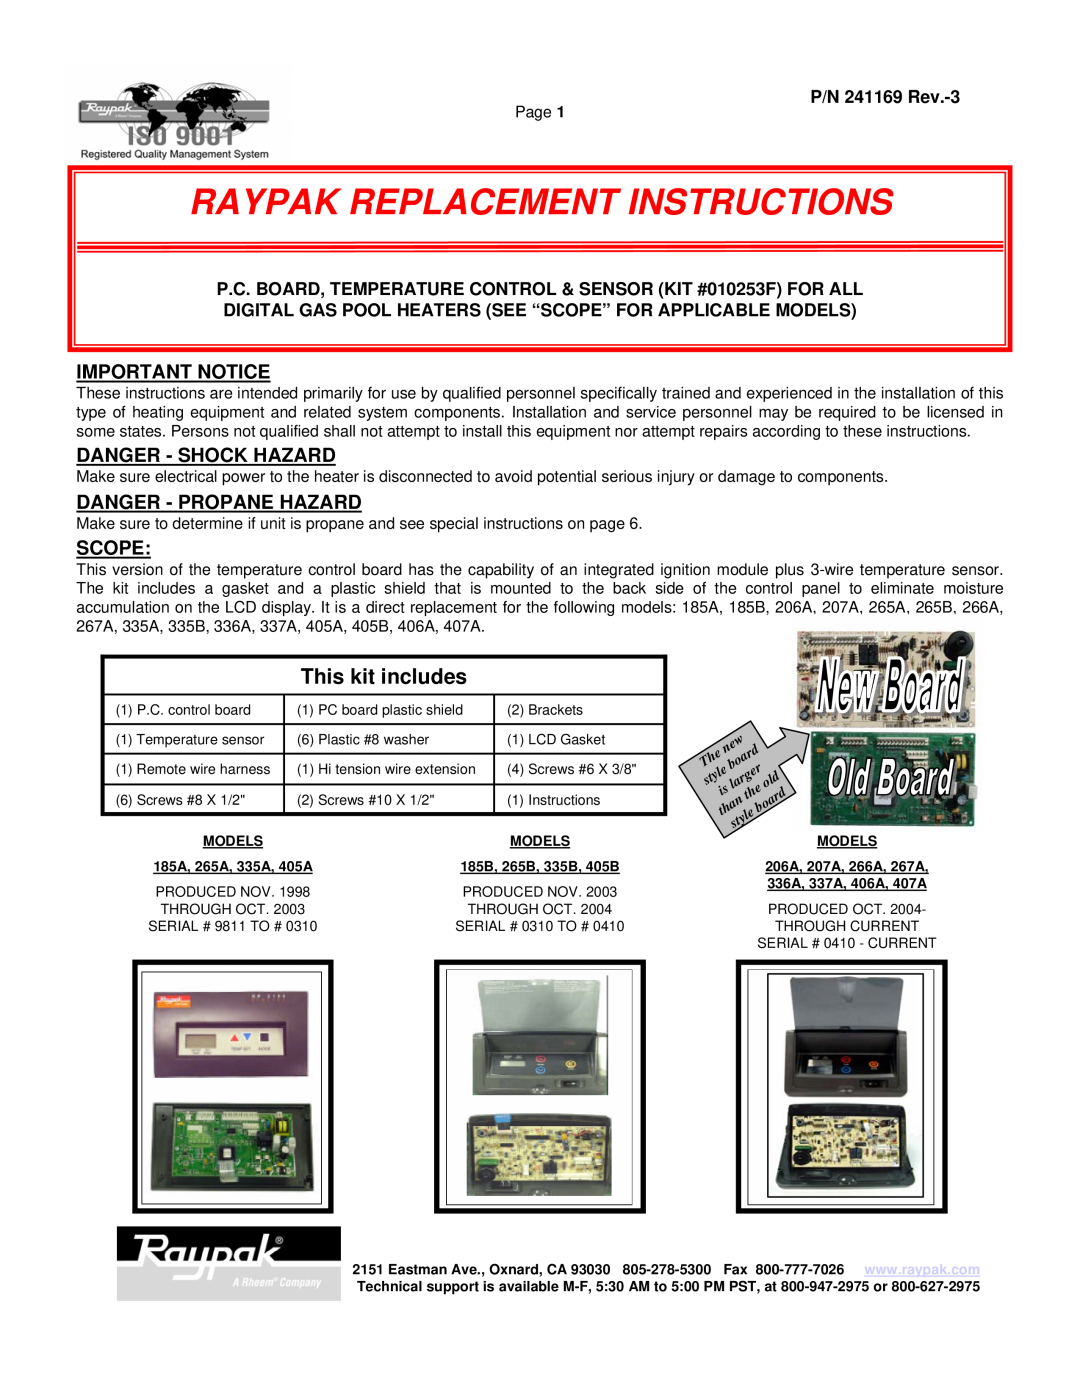 Raypak 185A manual Raypak Replacement Instructions, This kit includes, Important Notice, Danger - Shock Hazard, Scope 